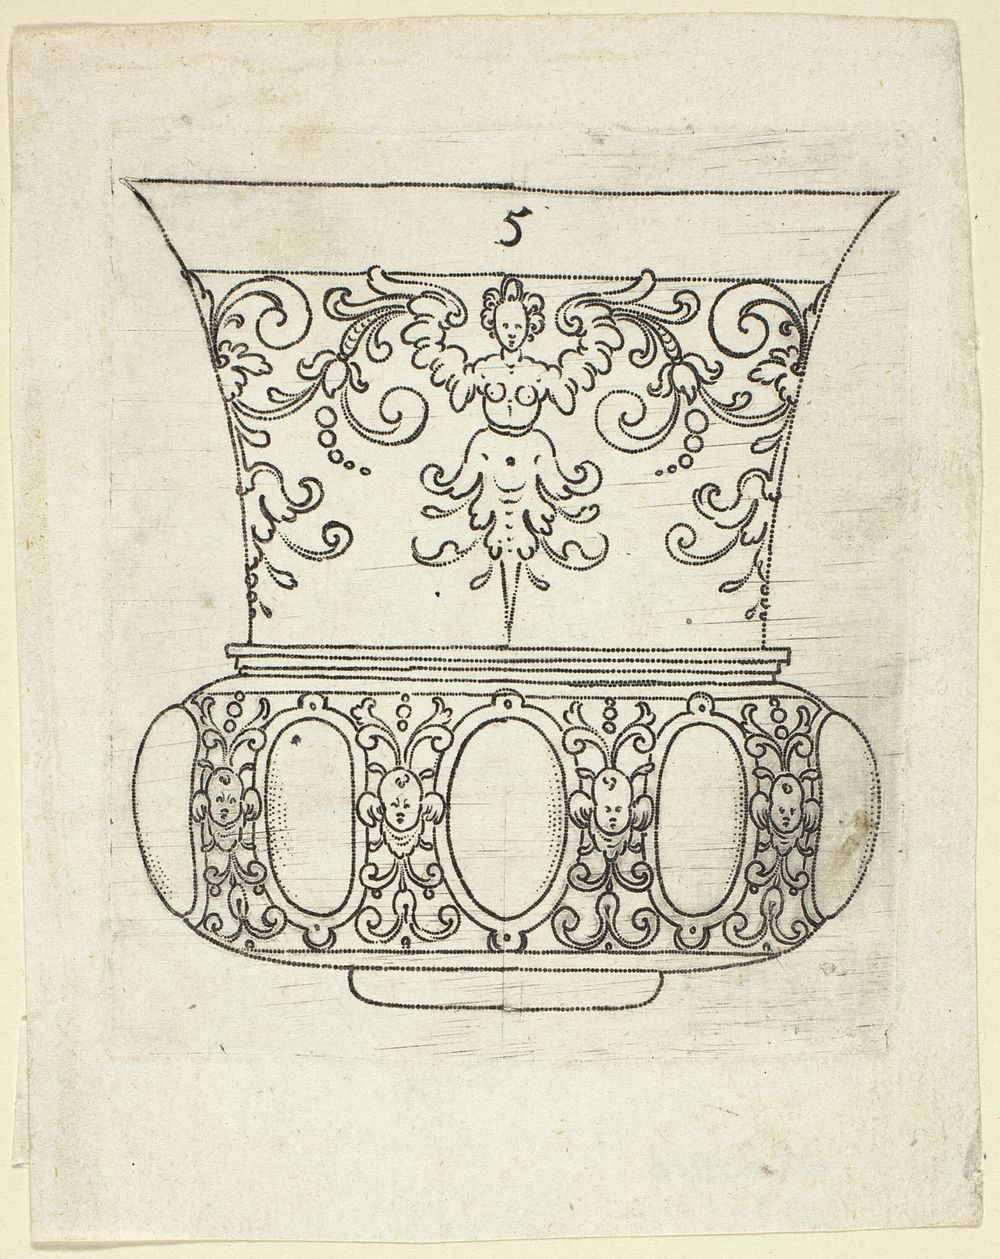 Plate 5, from XX Stuck zum (ornamental designs for goblets and beakers) by Master A.P.